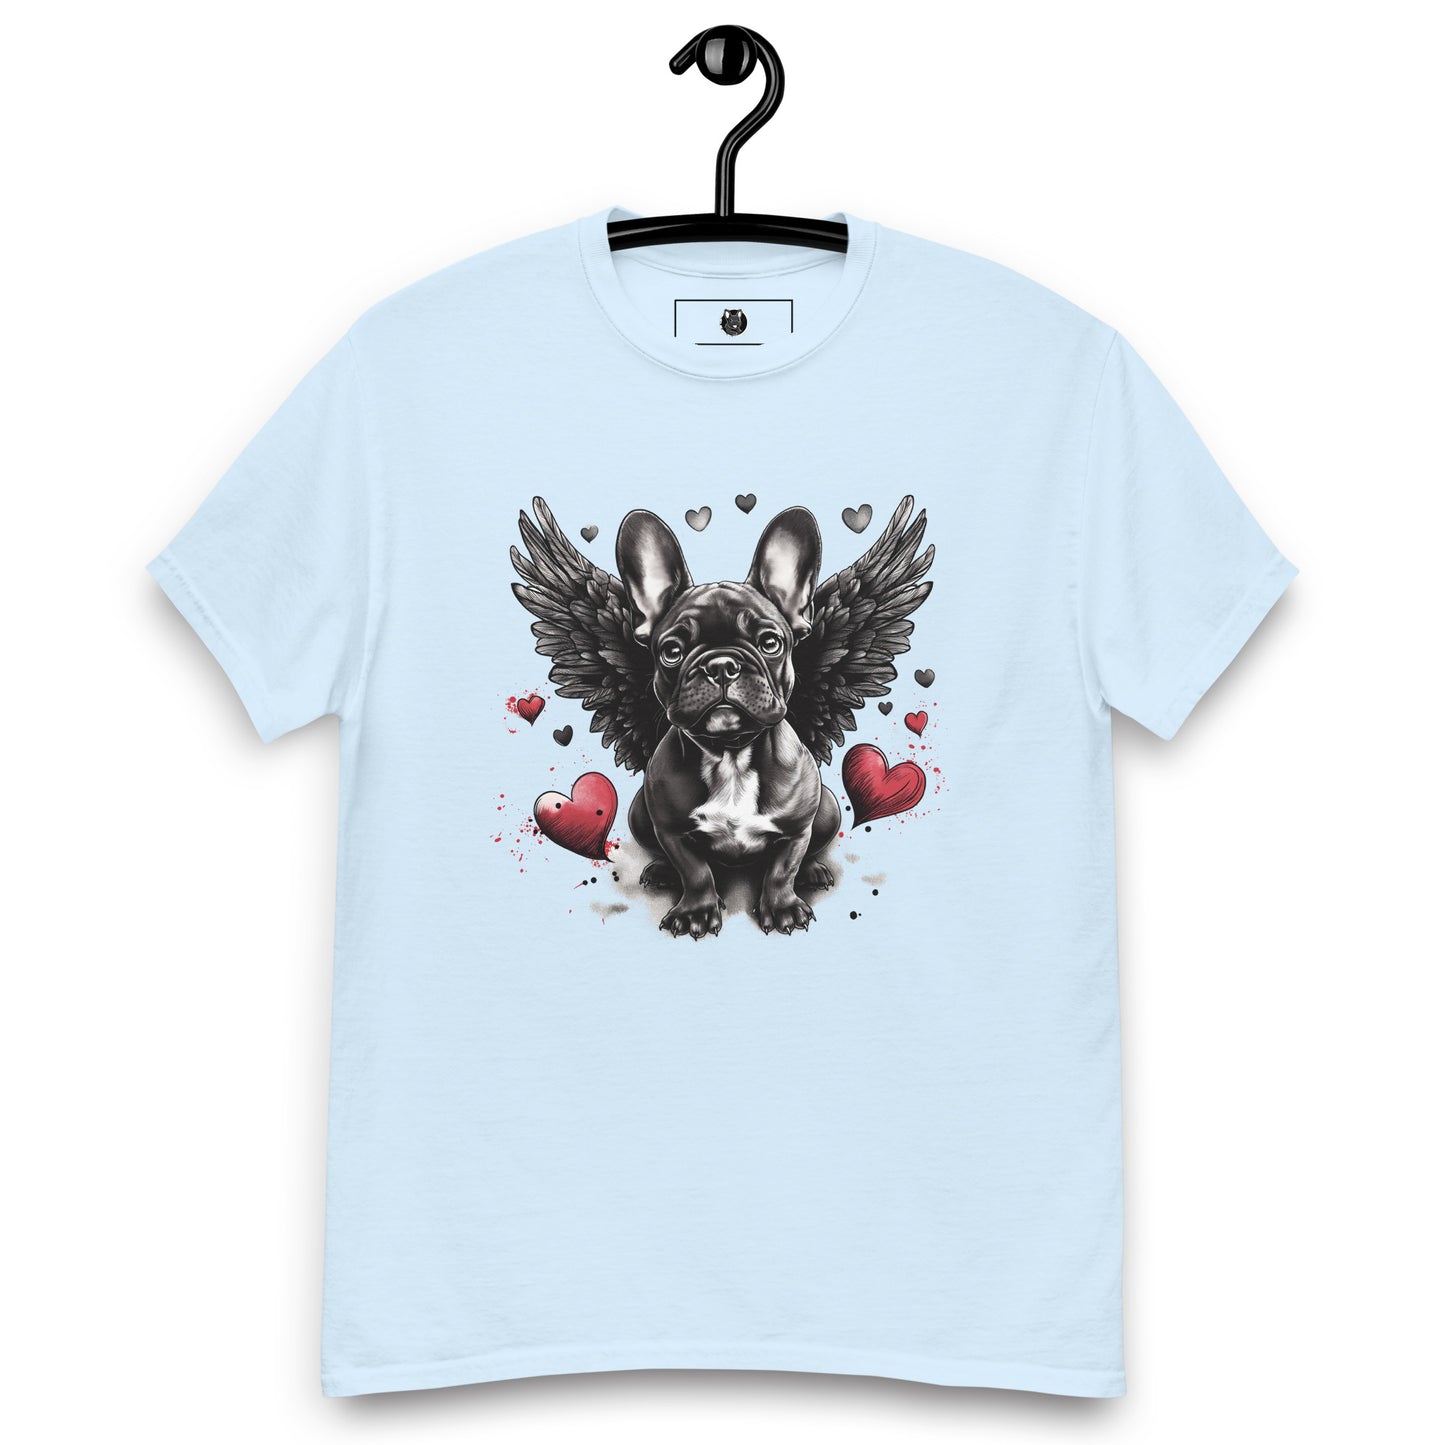 "Heavenly Hearts Frenchie" Unisex T-Shirt